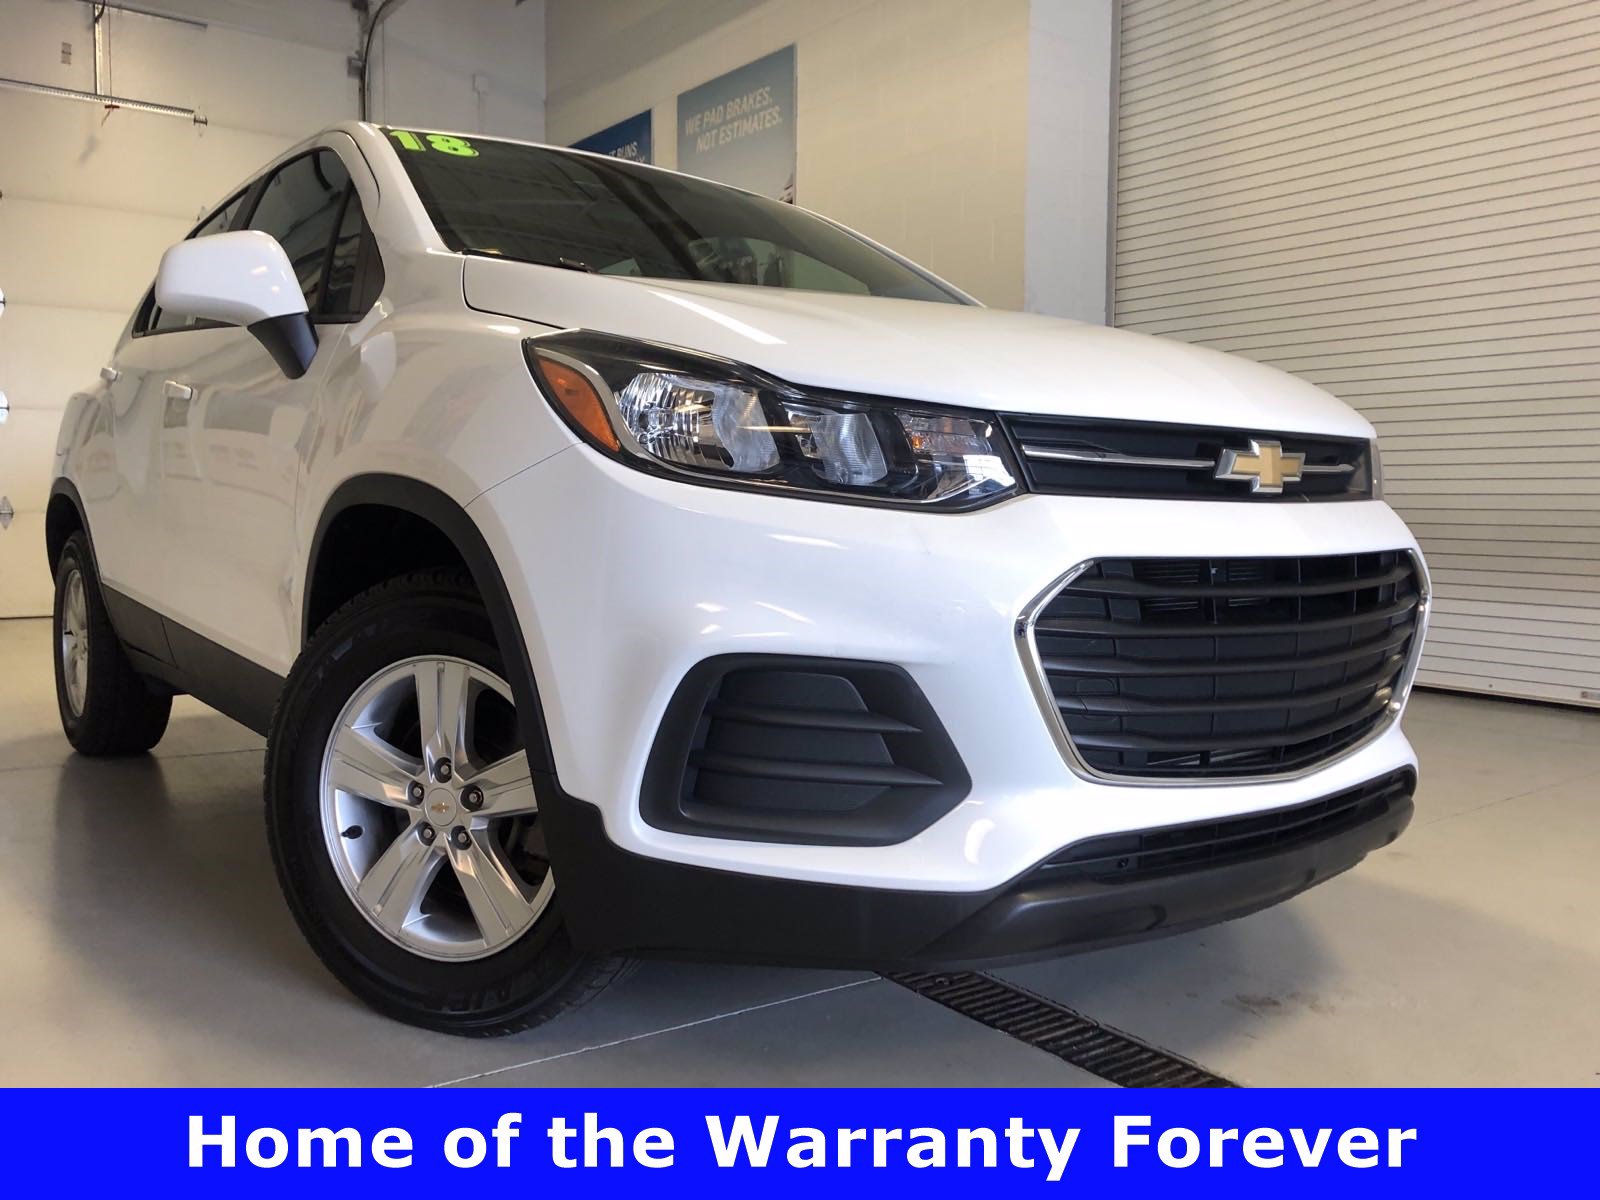 Used 18 Chevrolet Trax For Sale At Cole Valley Chevrolet Vin Kl7cjnsb8jb6998